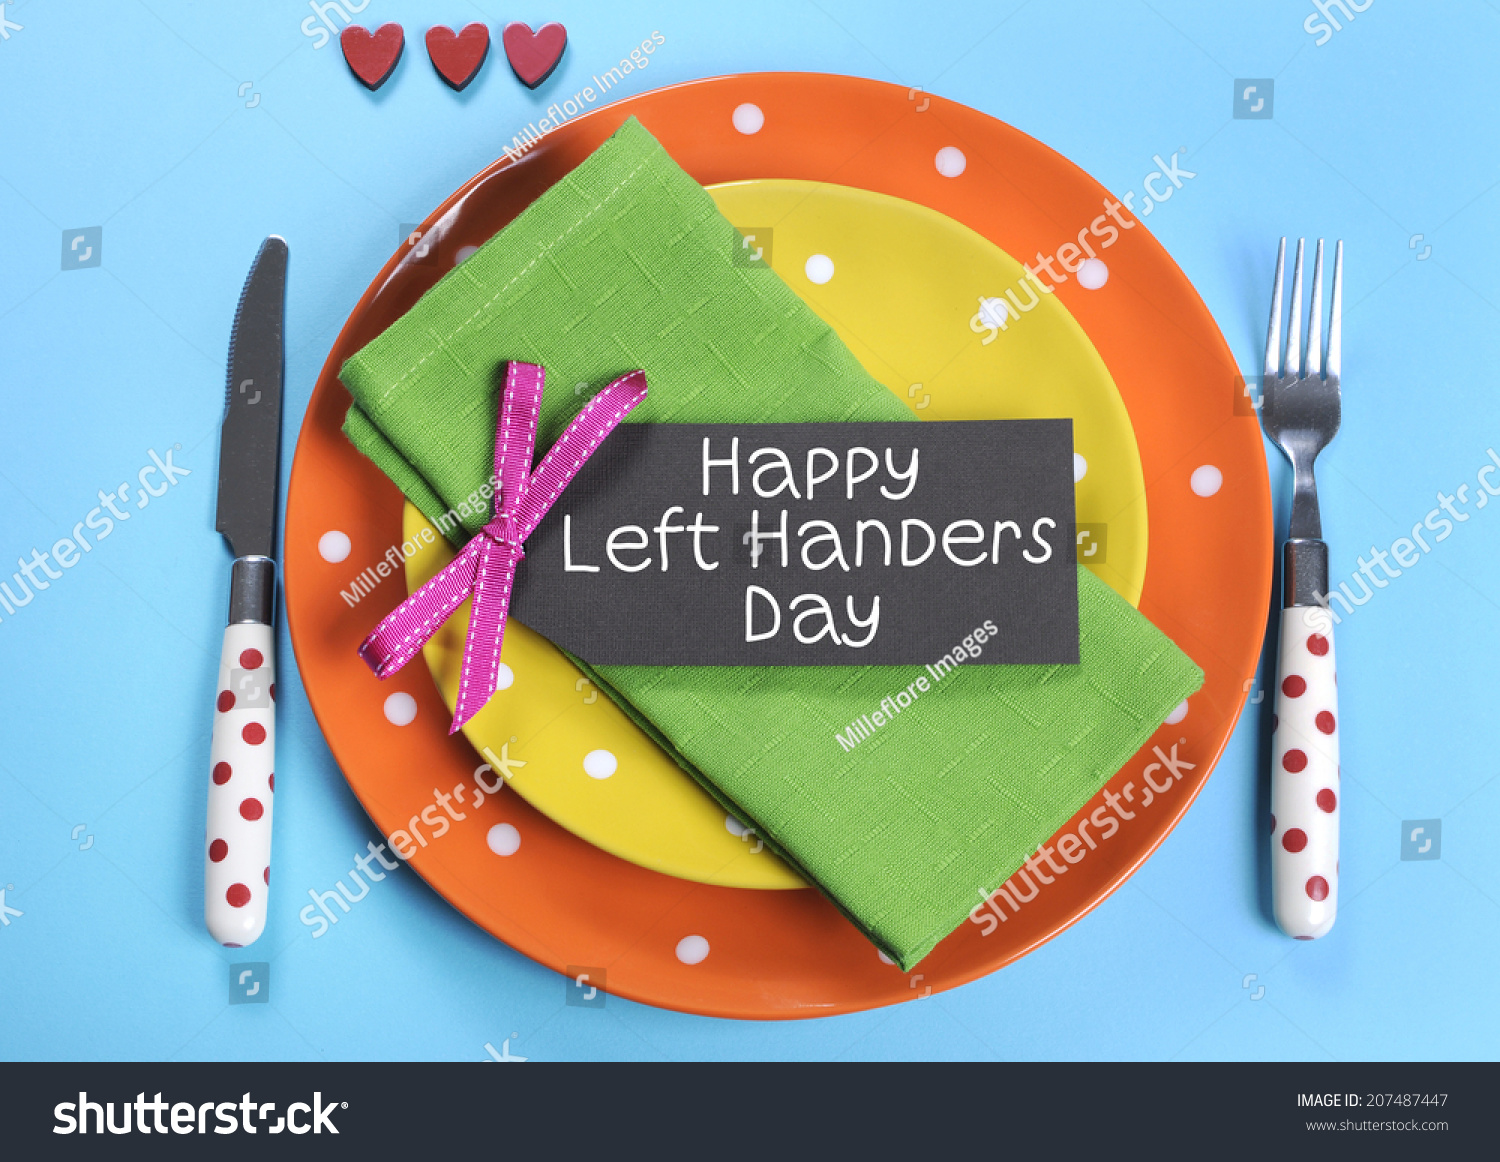 Happy Lefthanders Day, for August 13, International Left-handers Day, with colorful table setting showing reverse cutlery placing, in orange, yellow, pale blue and green polka dot colors. #207487447